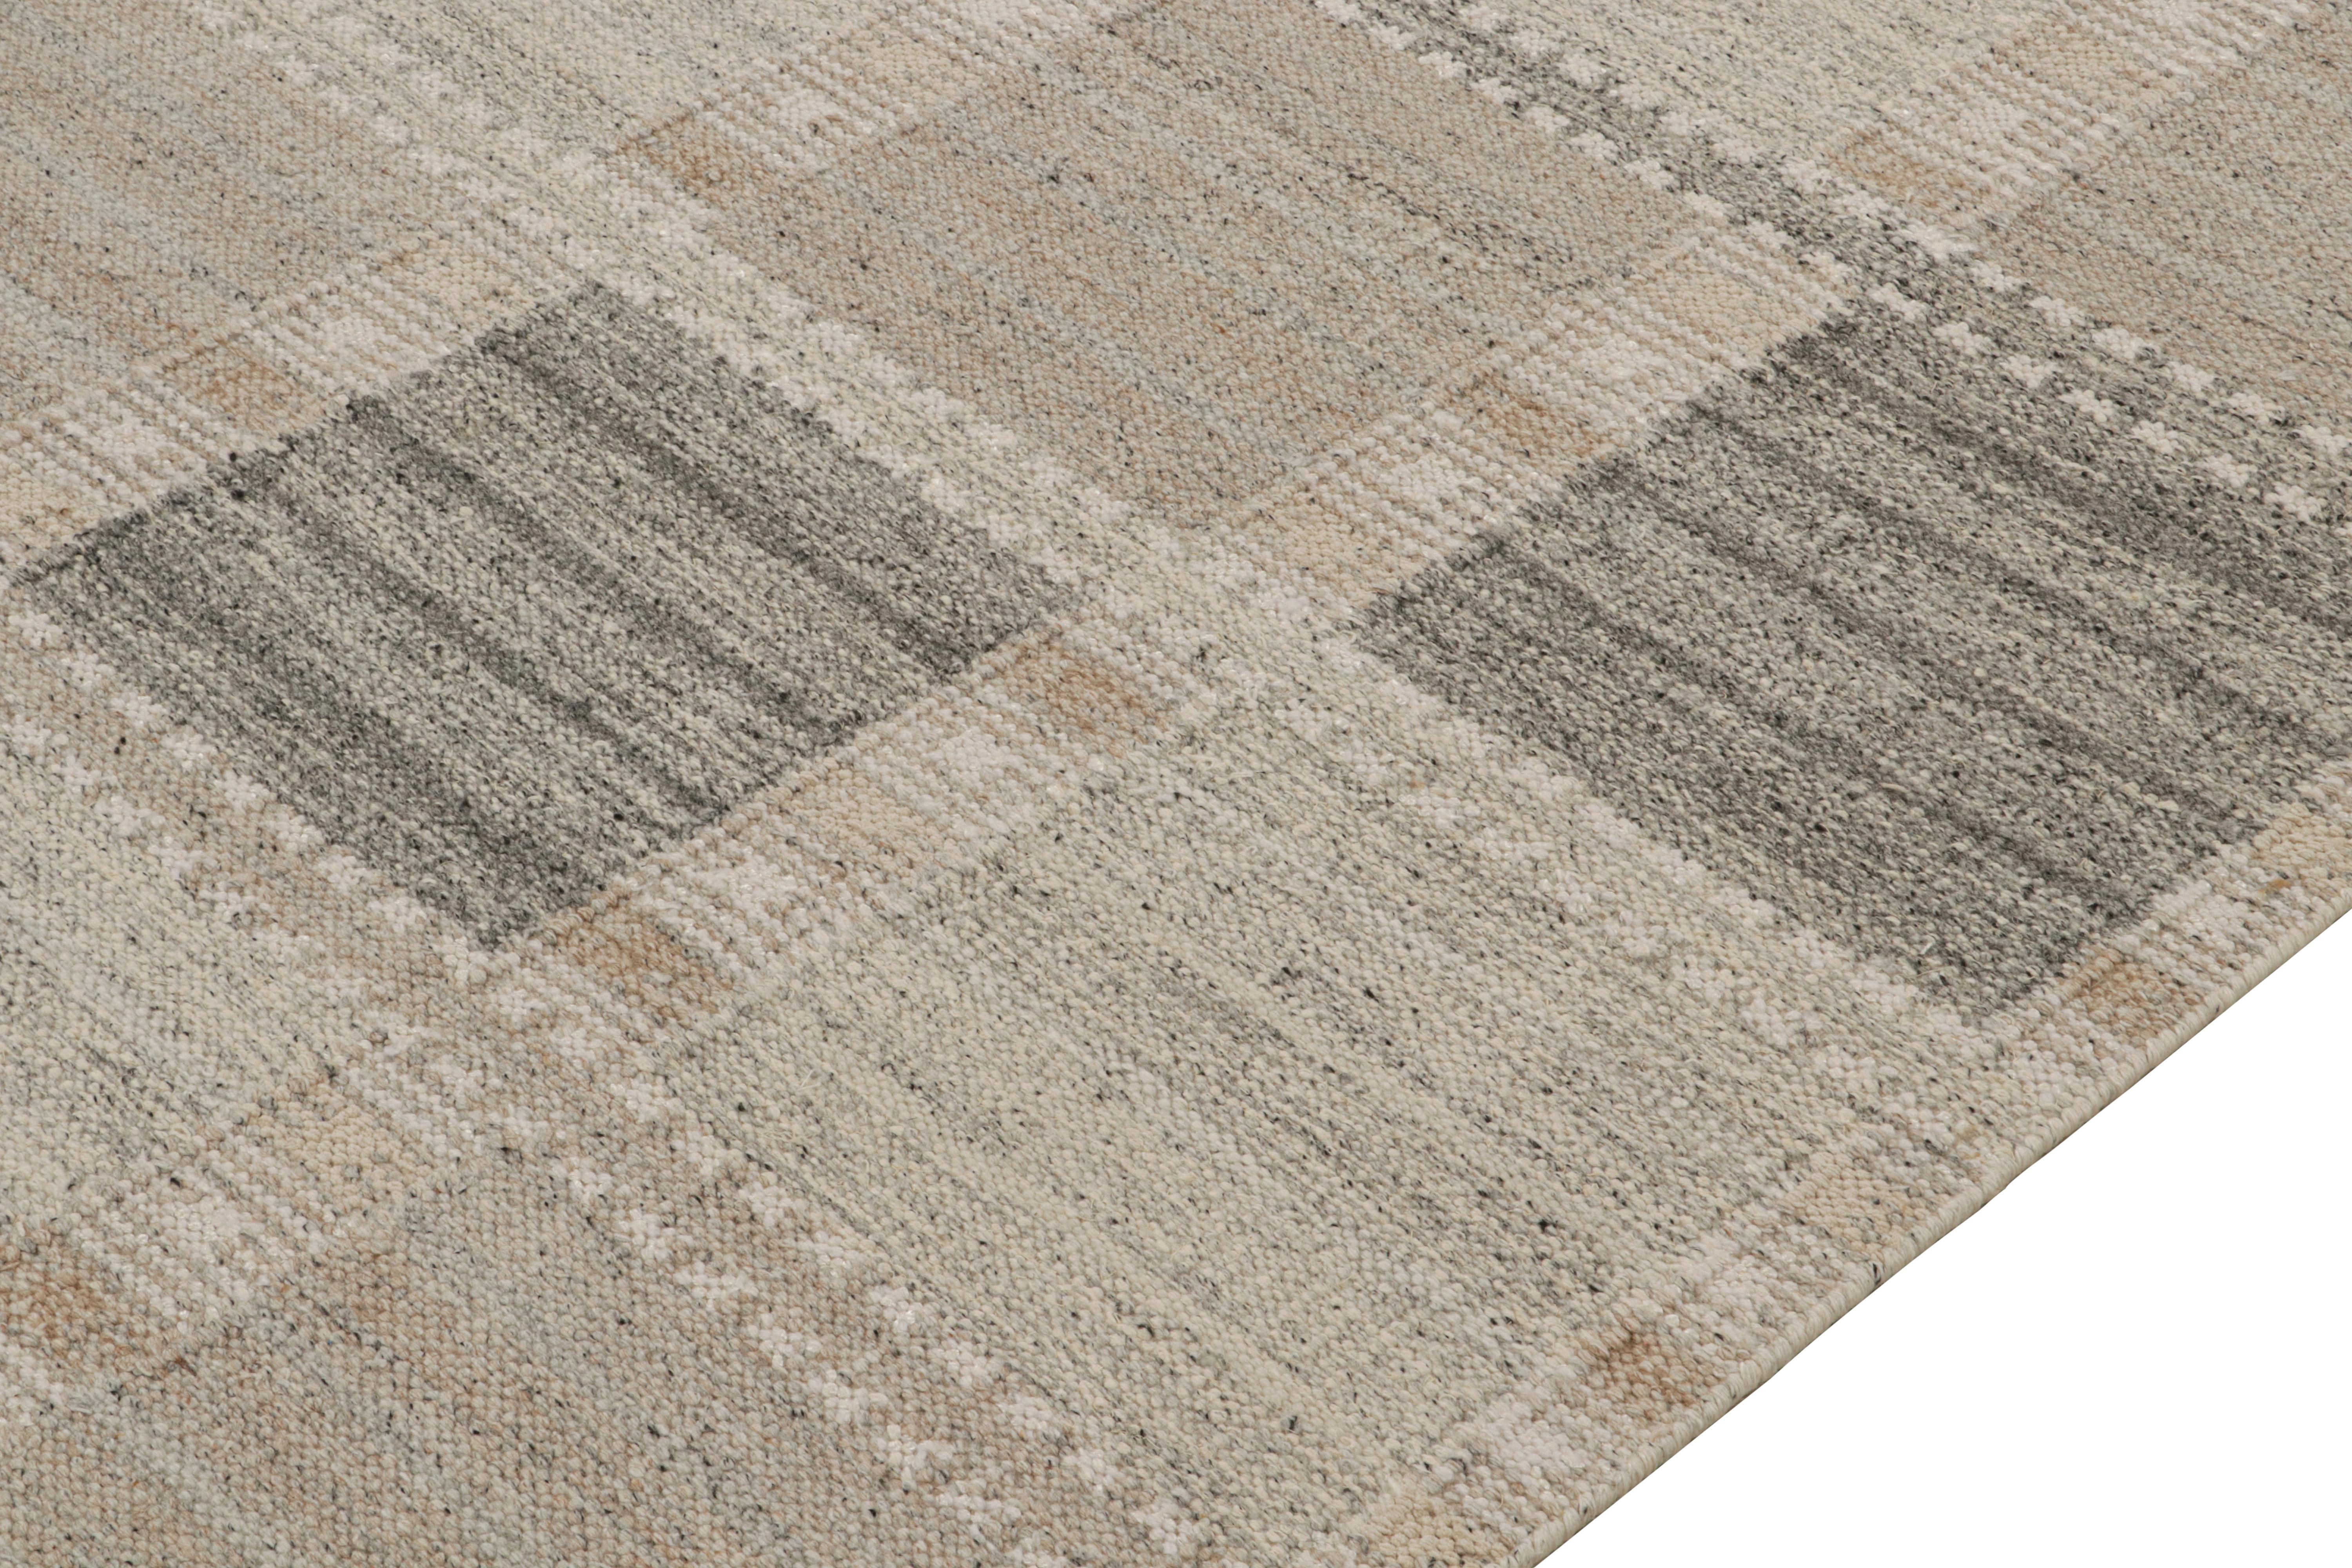 Hand-Woven Rug & Kilim’s Scandinavian Style Kilim Rug in Beige and Gray Geometric Patterns For Sale